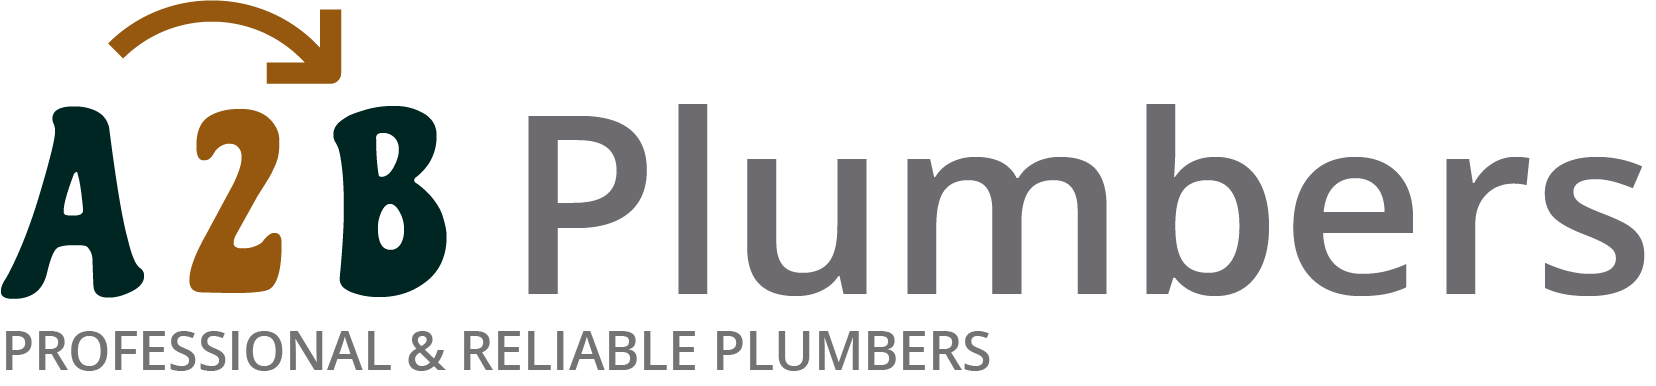 If you need a boiler installed, a radiator repaired or a leaking tap fixed, call us now - we provide services for properties in Bodmin and the local area.